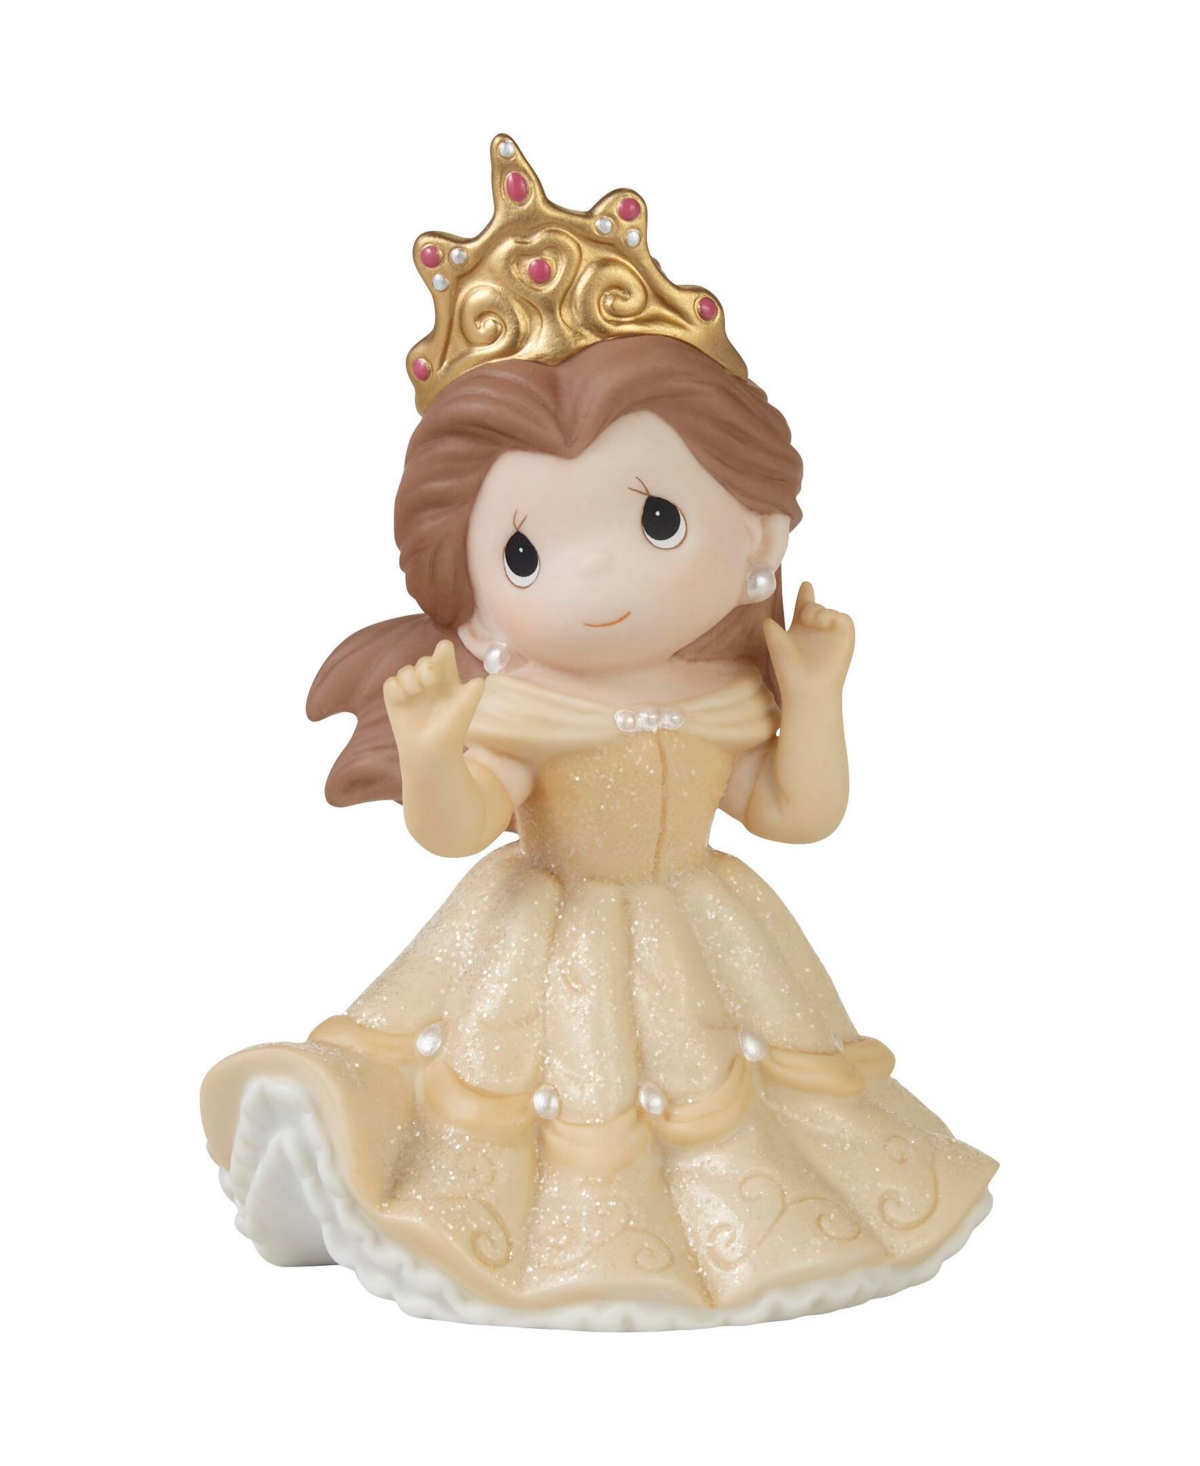 Precious Moments Happily Ever After Disney Belle Bisque Porcelain Figurine In Multicolored